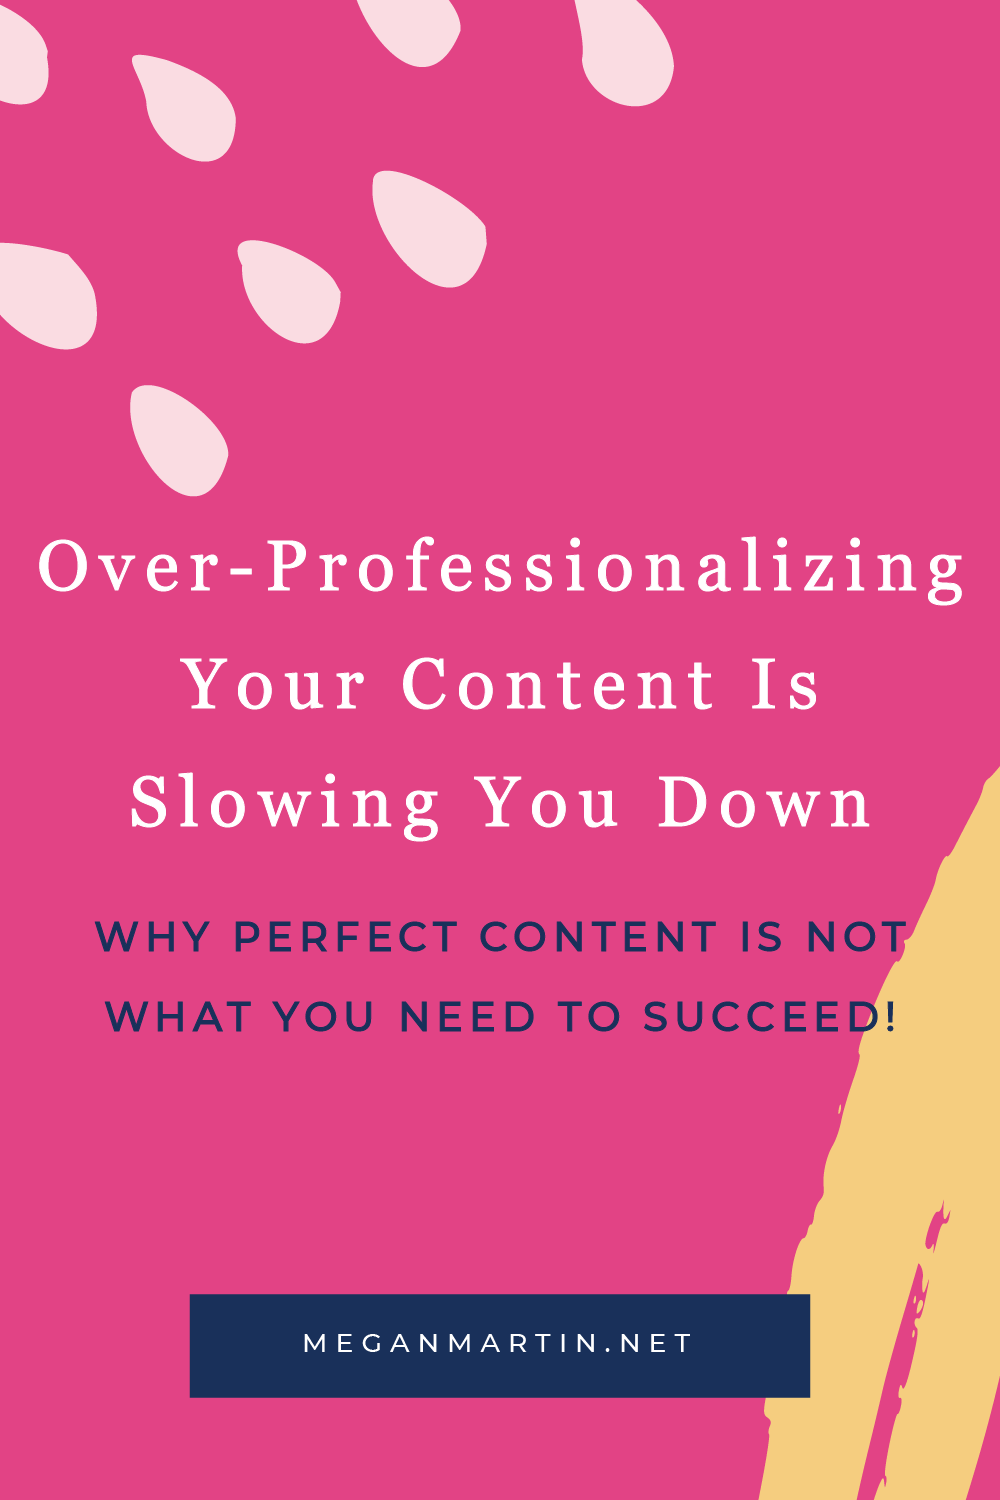 Over-Professionalizing Your Content Is Slowing You Down from creating passive profit in your creative business